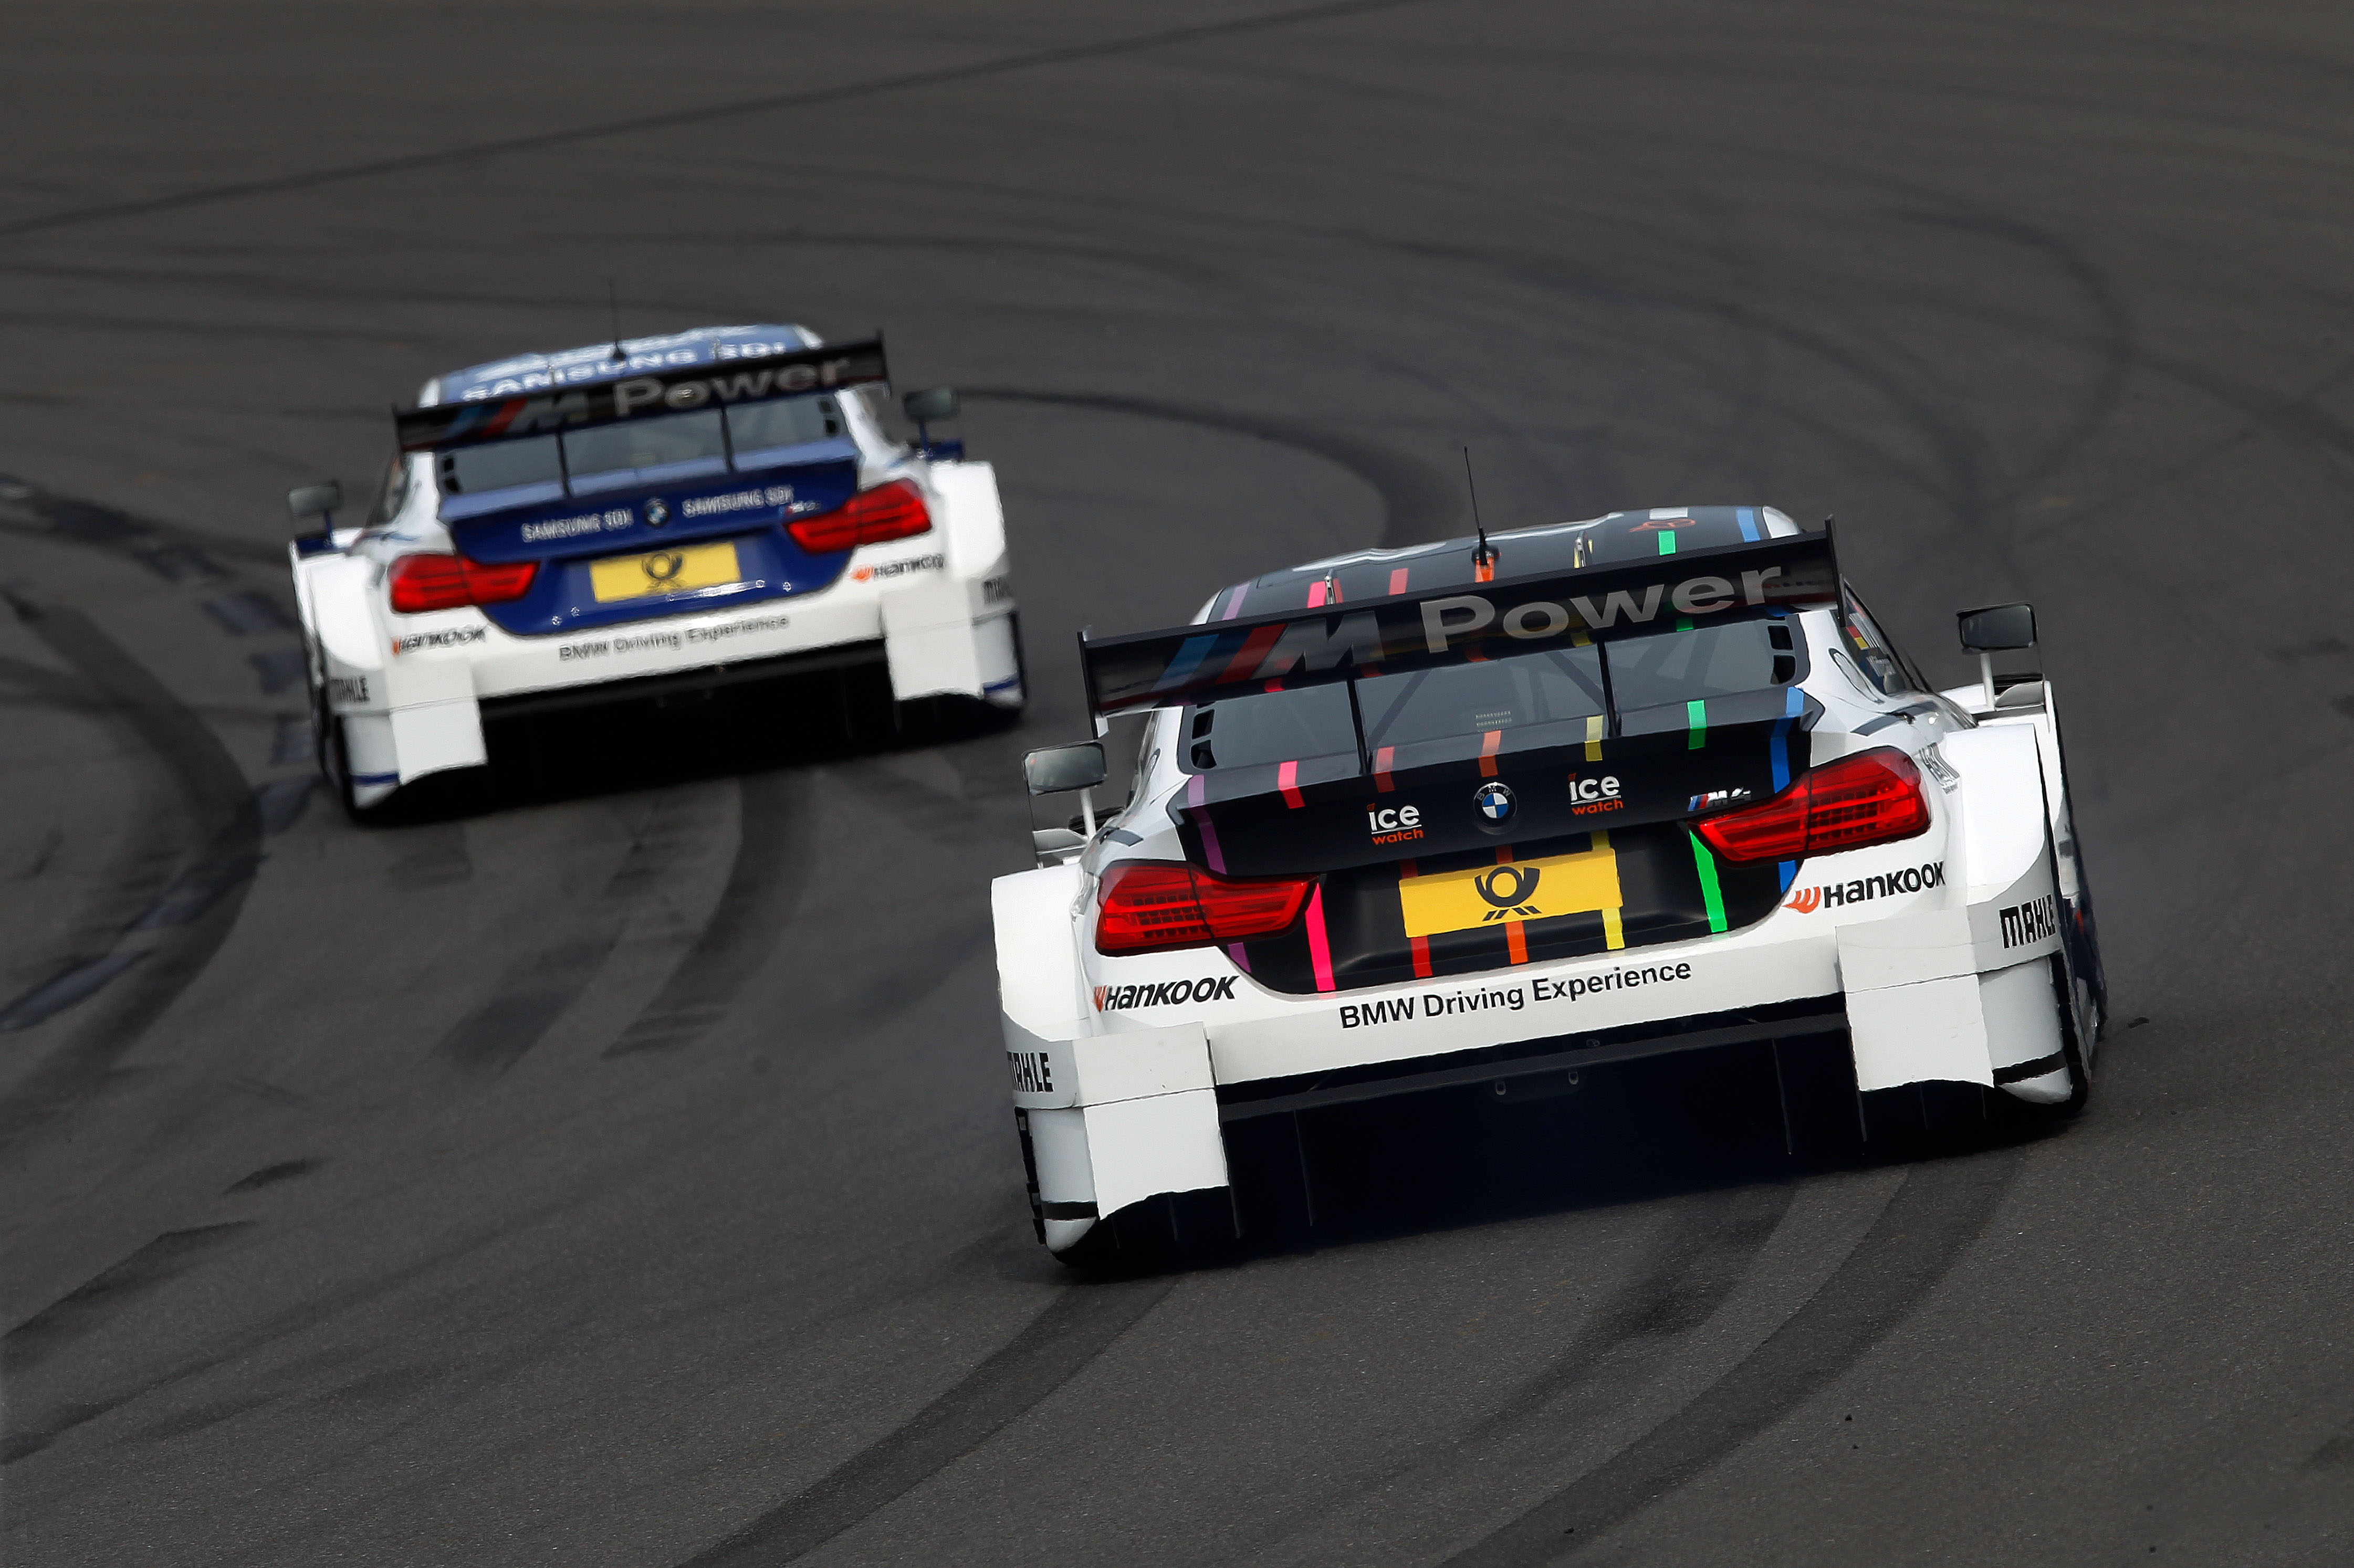 Lausitzring (DE) 31th May 2015. BMW Motorsport, Maxime Martin (BE) SAMSUNG BMW M4 DTM and Marco Wittmann (DE) Ice-Watch BMW M4 DTM. This image is copyright free for editorial use © BMW AG (05/2015).